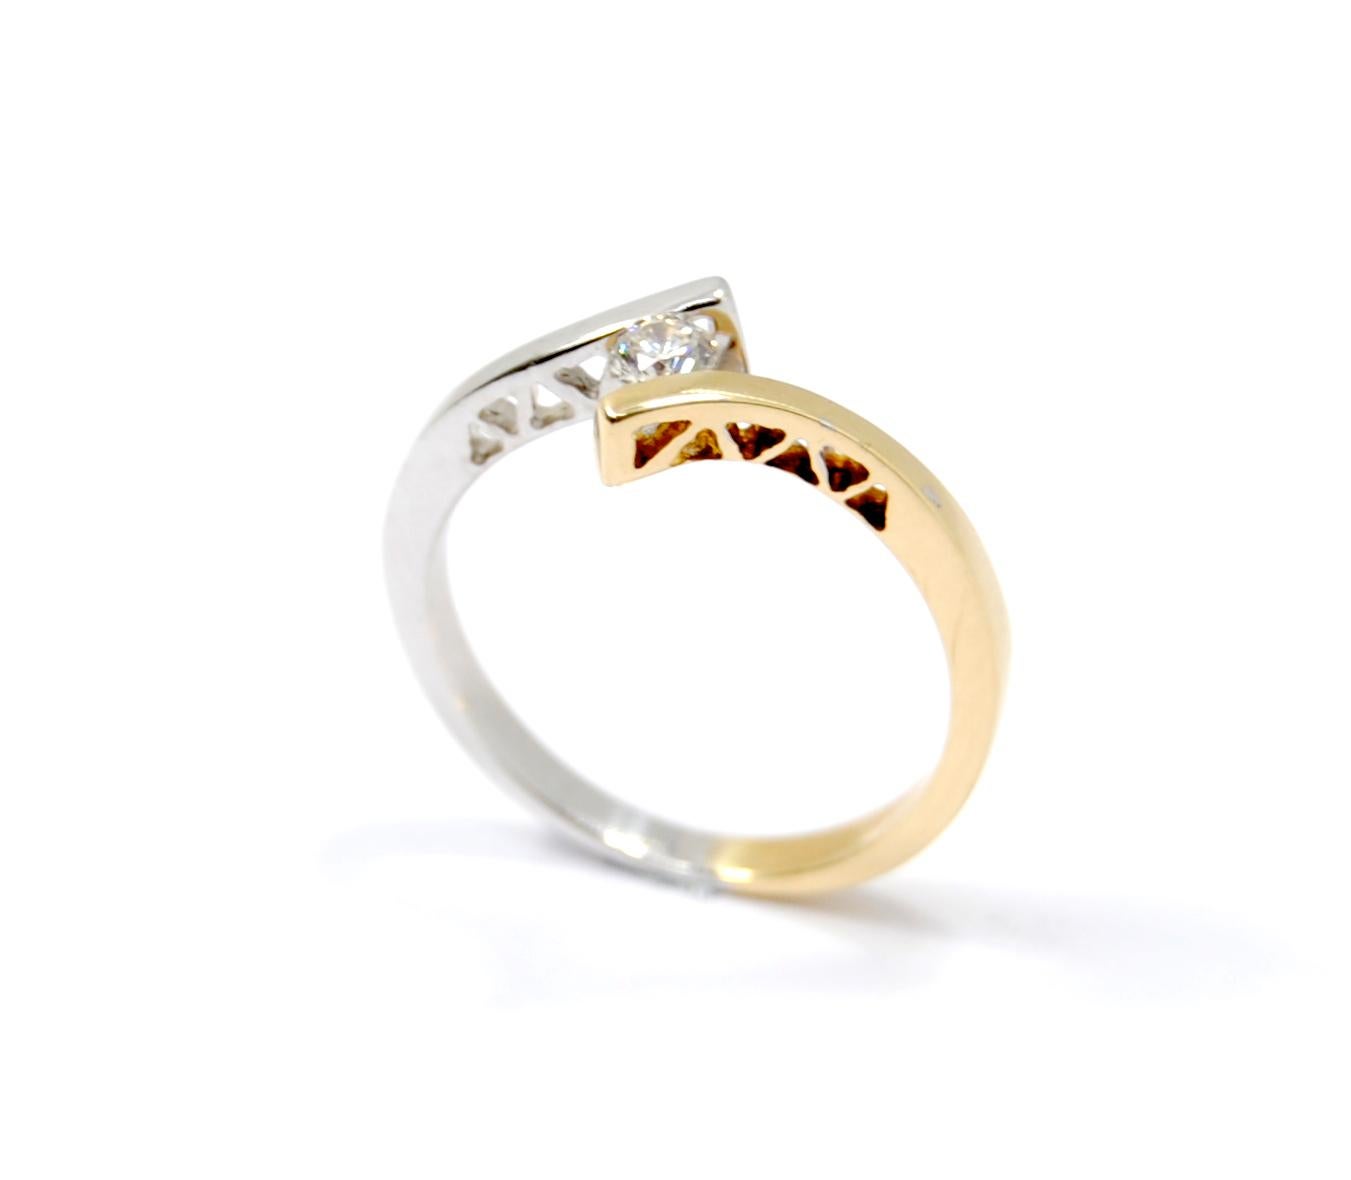 Engagement  Ring 0.15ct twist model in bicolor  18Kt Gold
18K WHITE AND YELLOW GOLD
US RING SIZE 7,  Europe 14  model
Order your size
READY TO SHIP
*Shipment of this piece is not affected by COVID-19. Orders welcome!*
STONES
◘ 0.16ct (VS, G-H)
◘